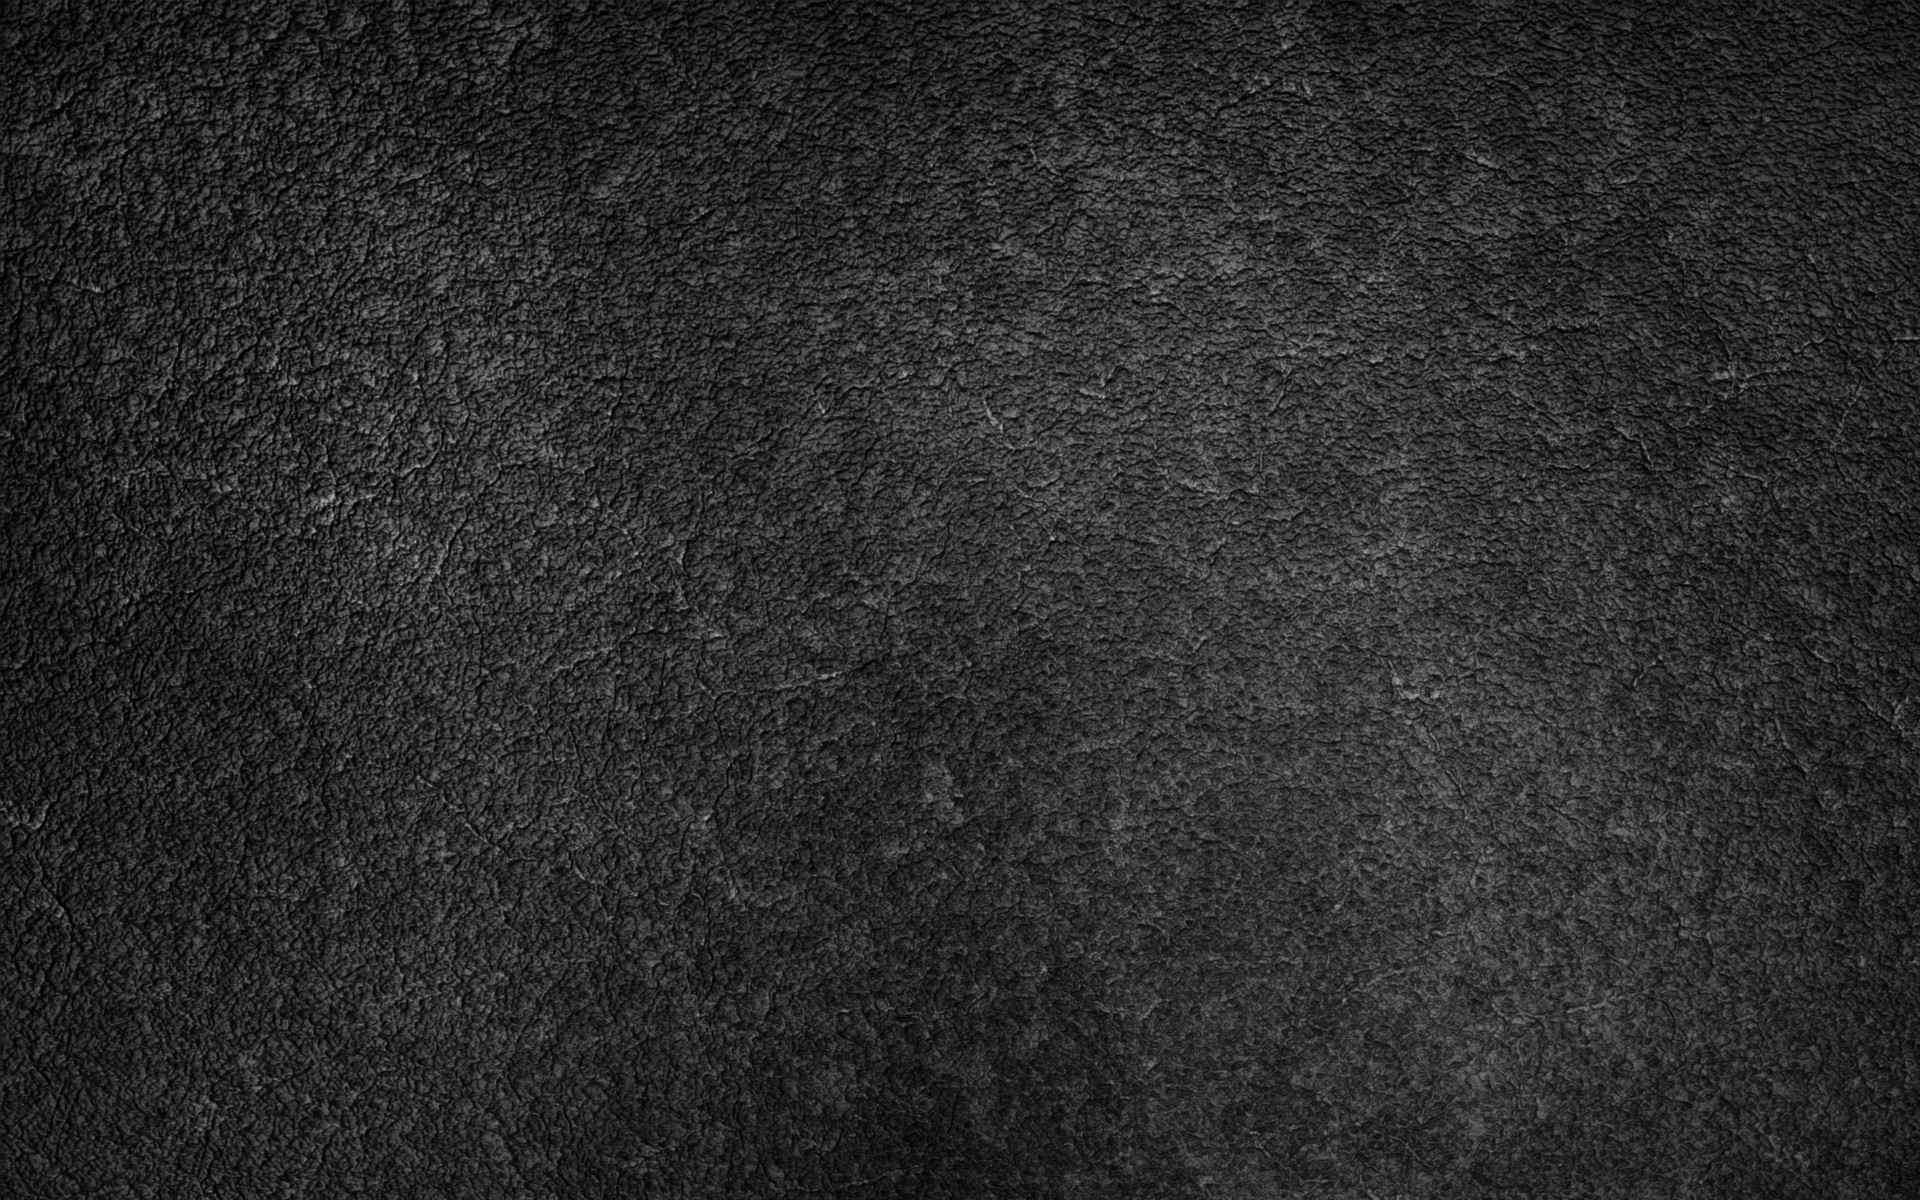  Black  Textured background    Download free amazing full HD 